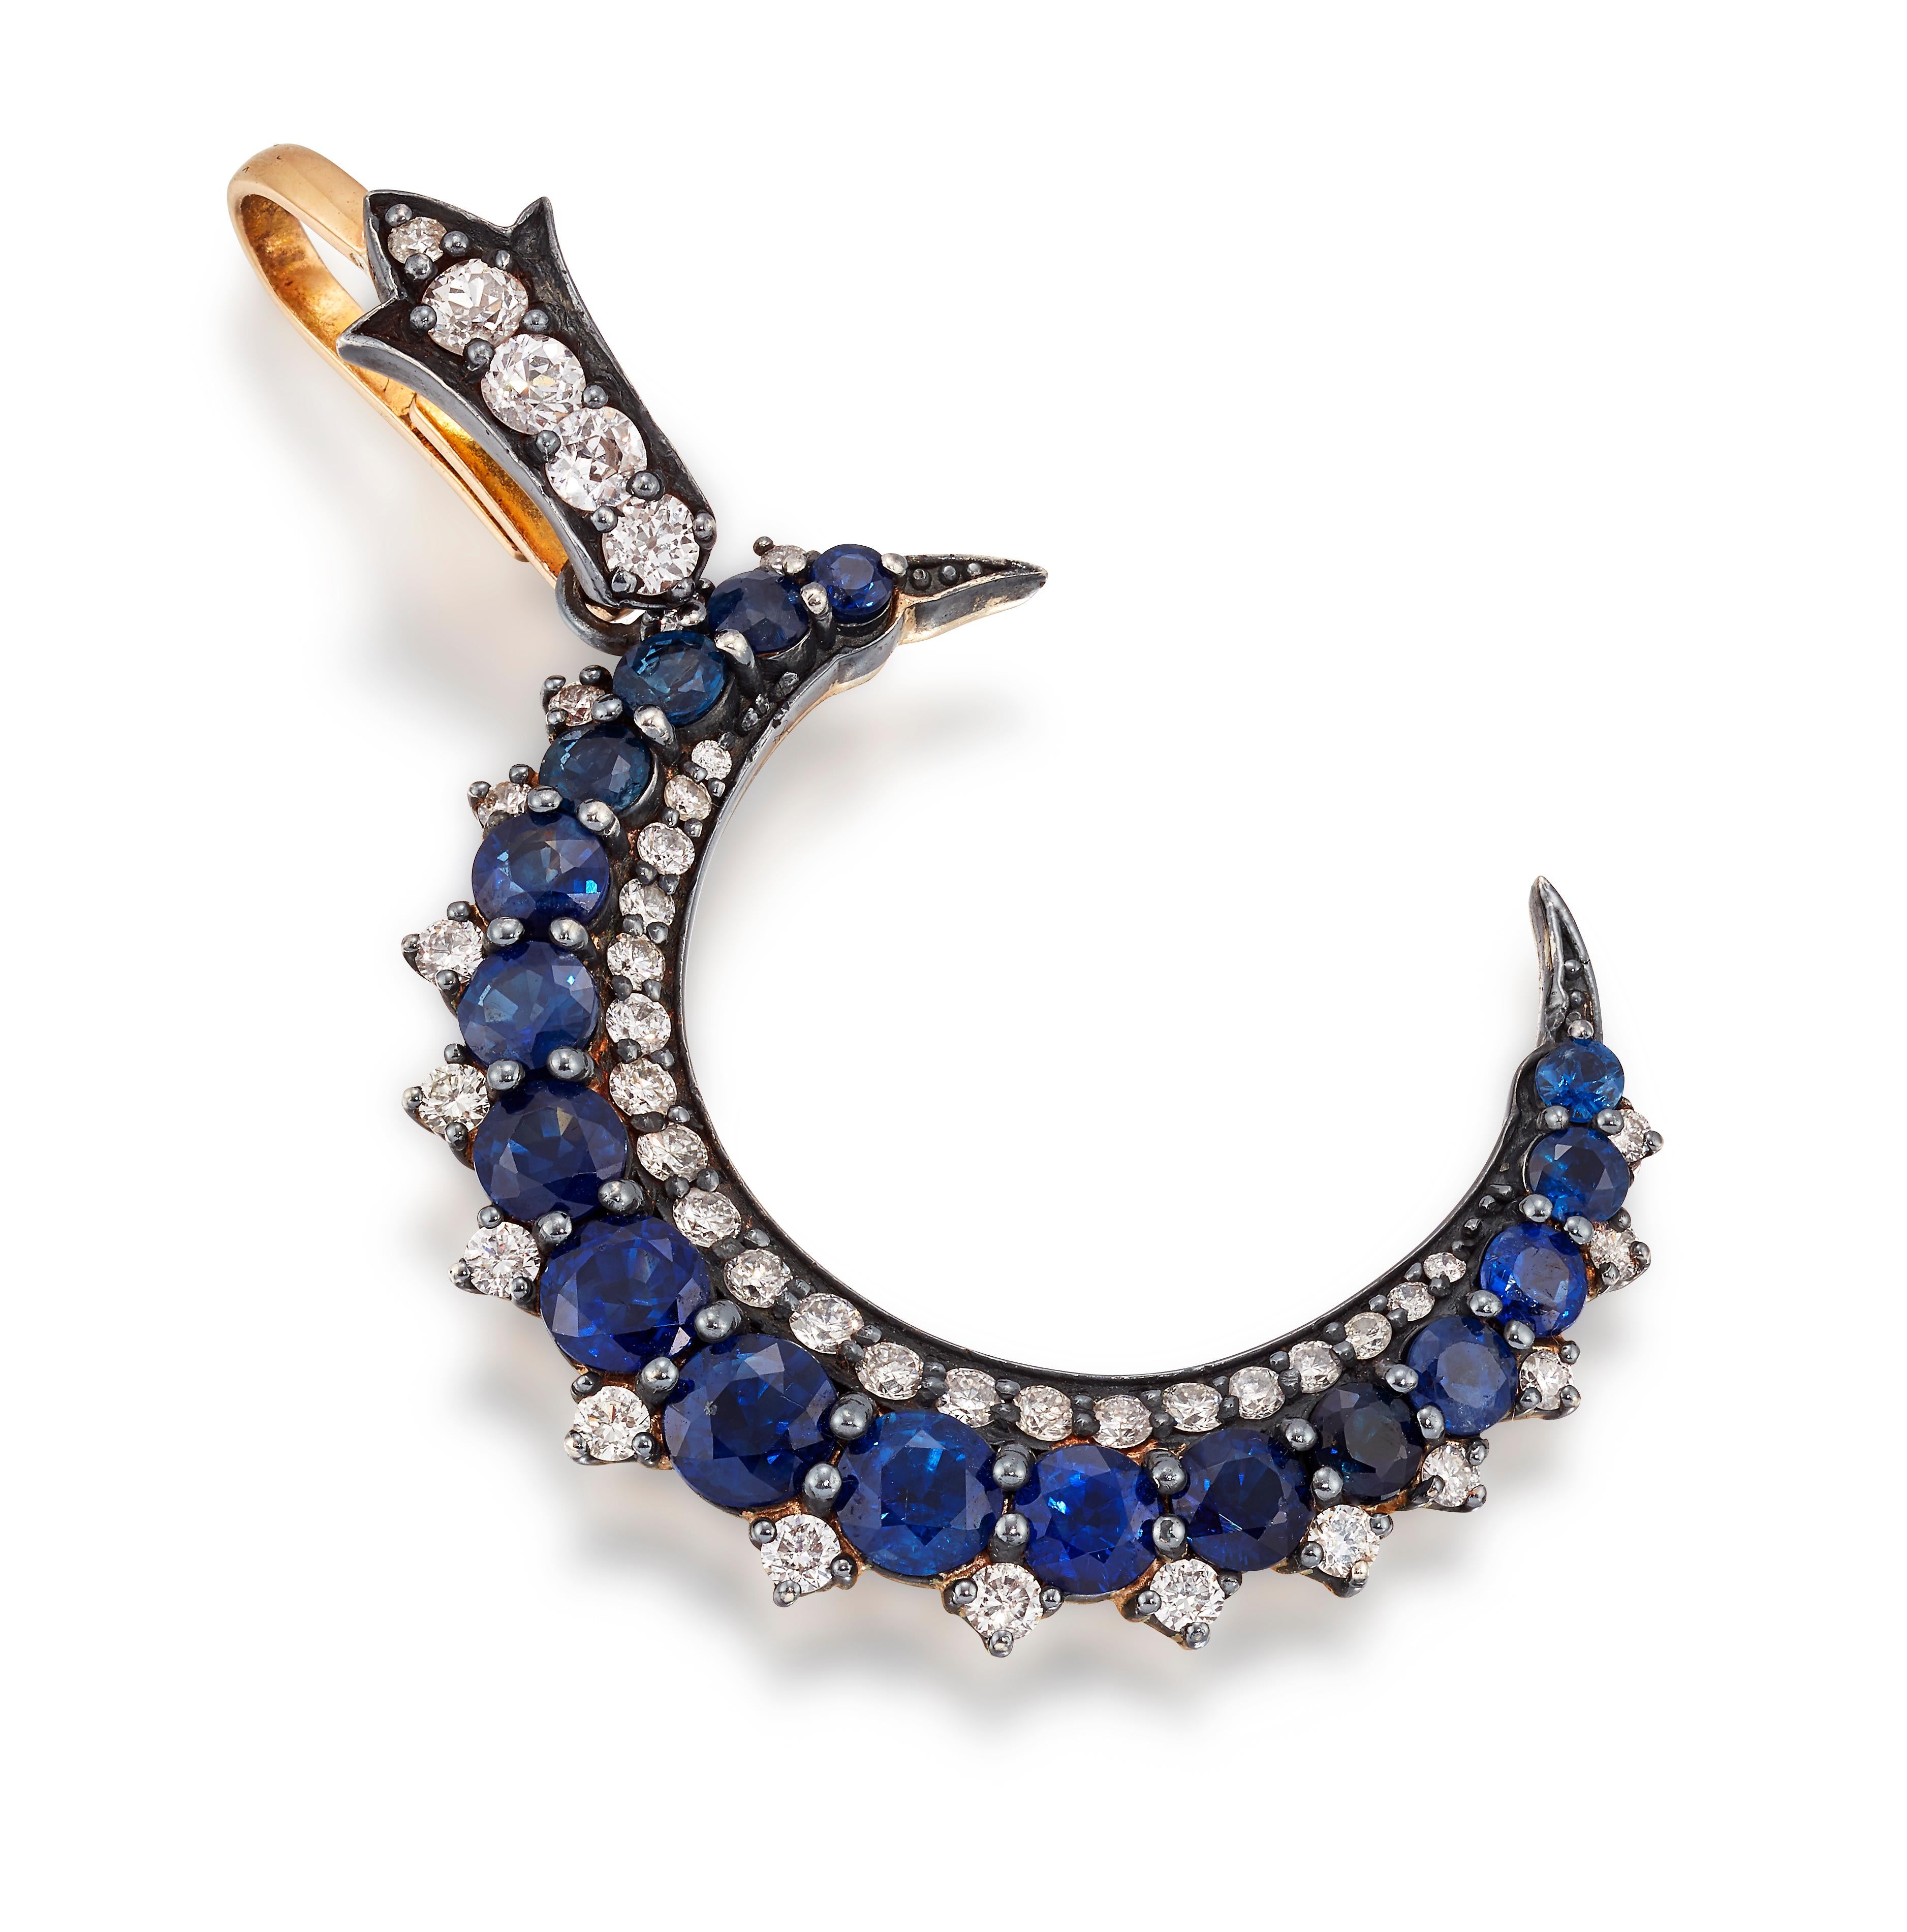 Handmade Sapphire and Diamond Crescent moon shape pendant.

Set with circular cut Sapphires and old cut Diamonds, mounted in 18ct yellow gold and Silver.  